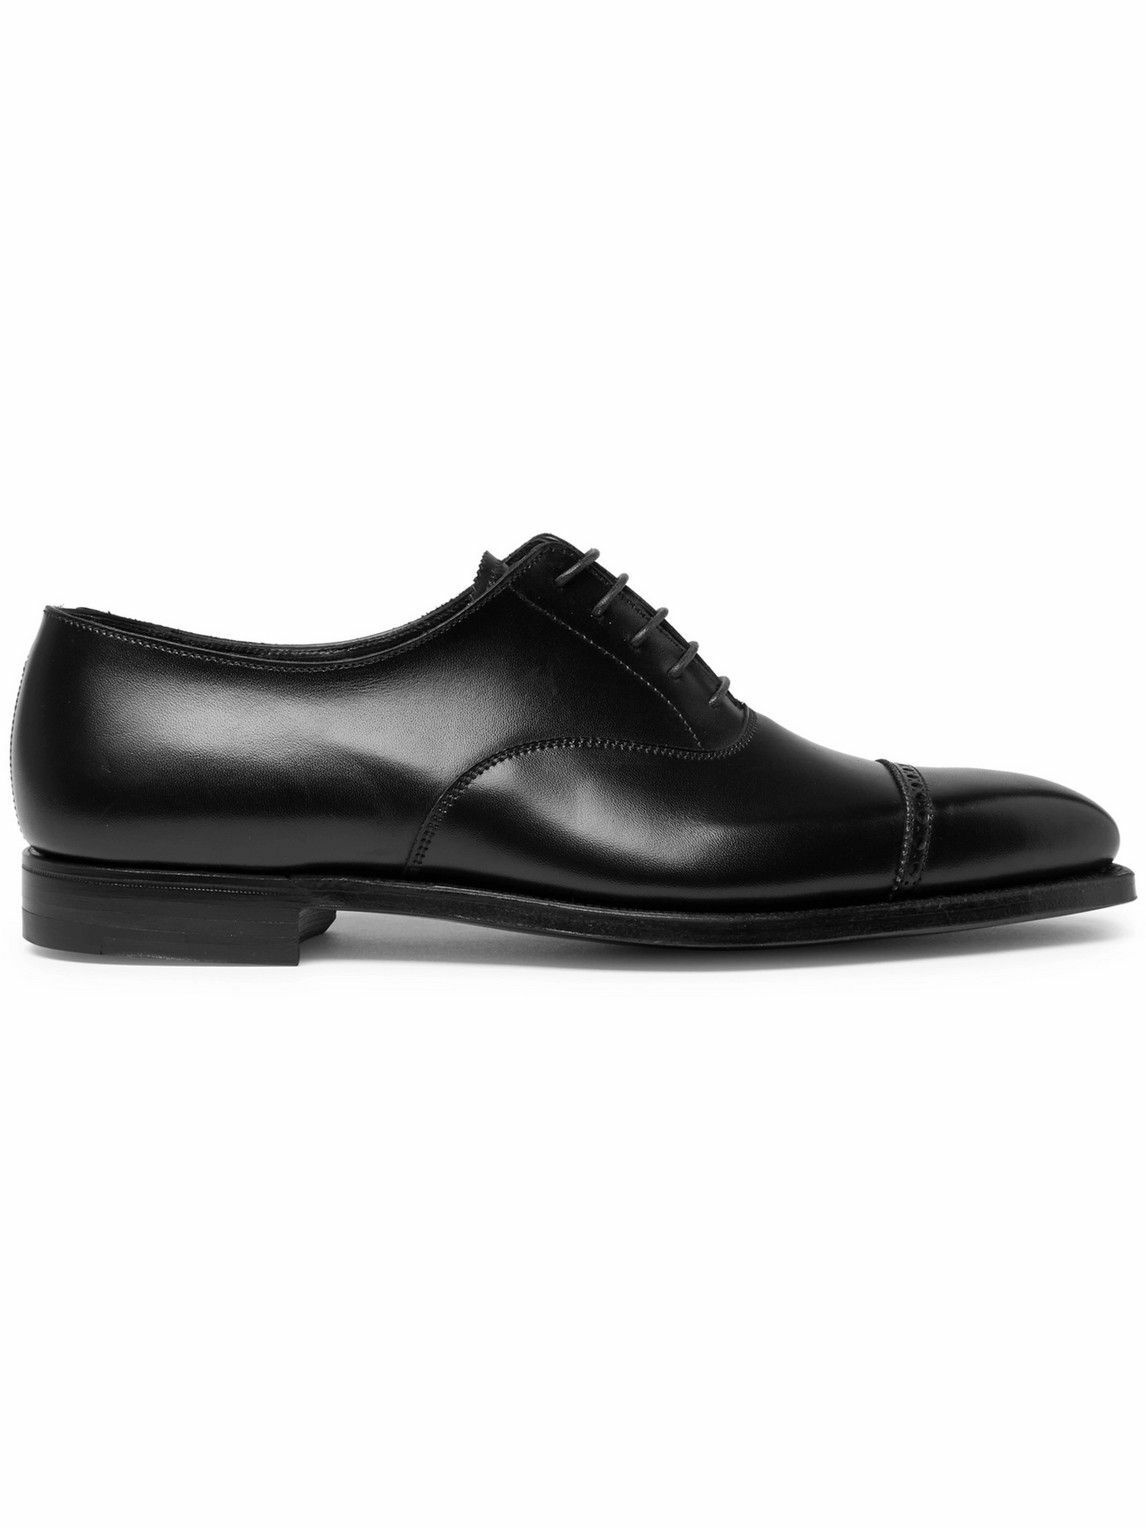 Photo: George Cleverley - Charles Cap-Toe Leather Oxford Shoes - Black